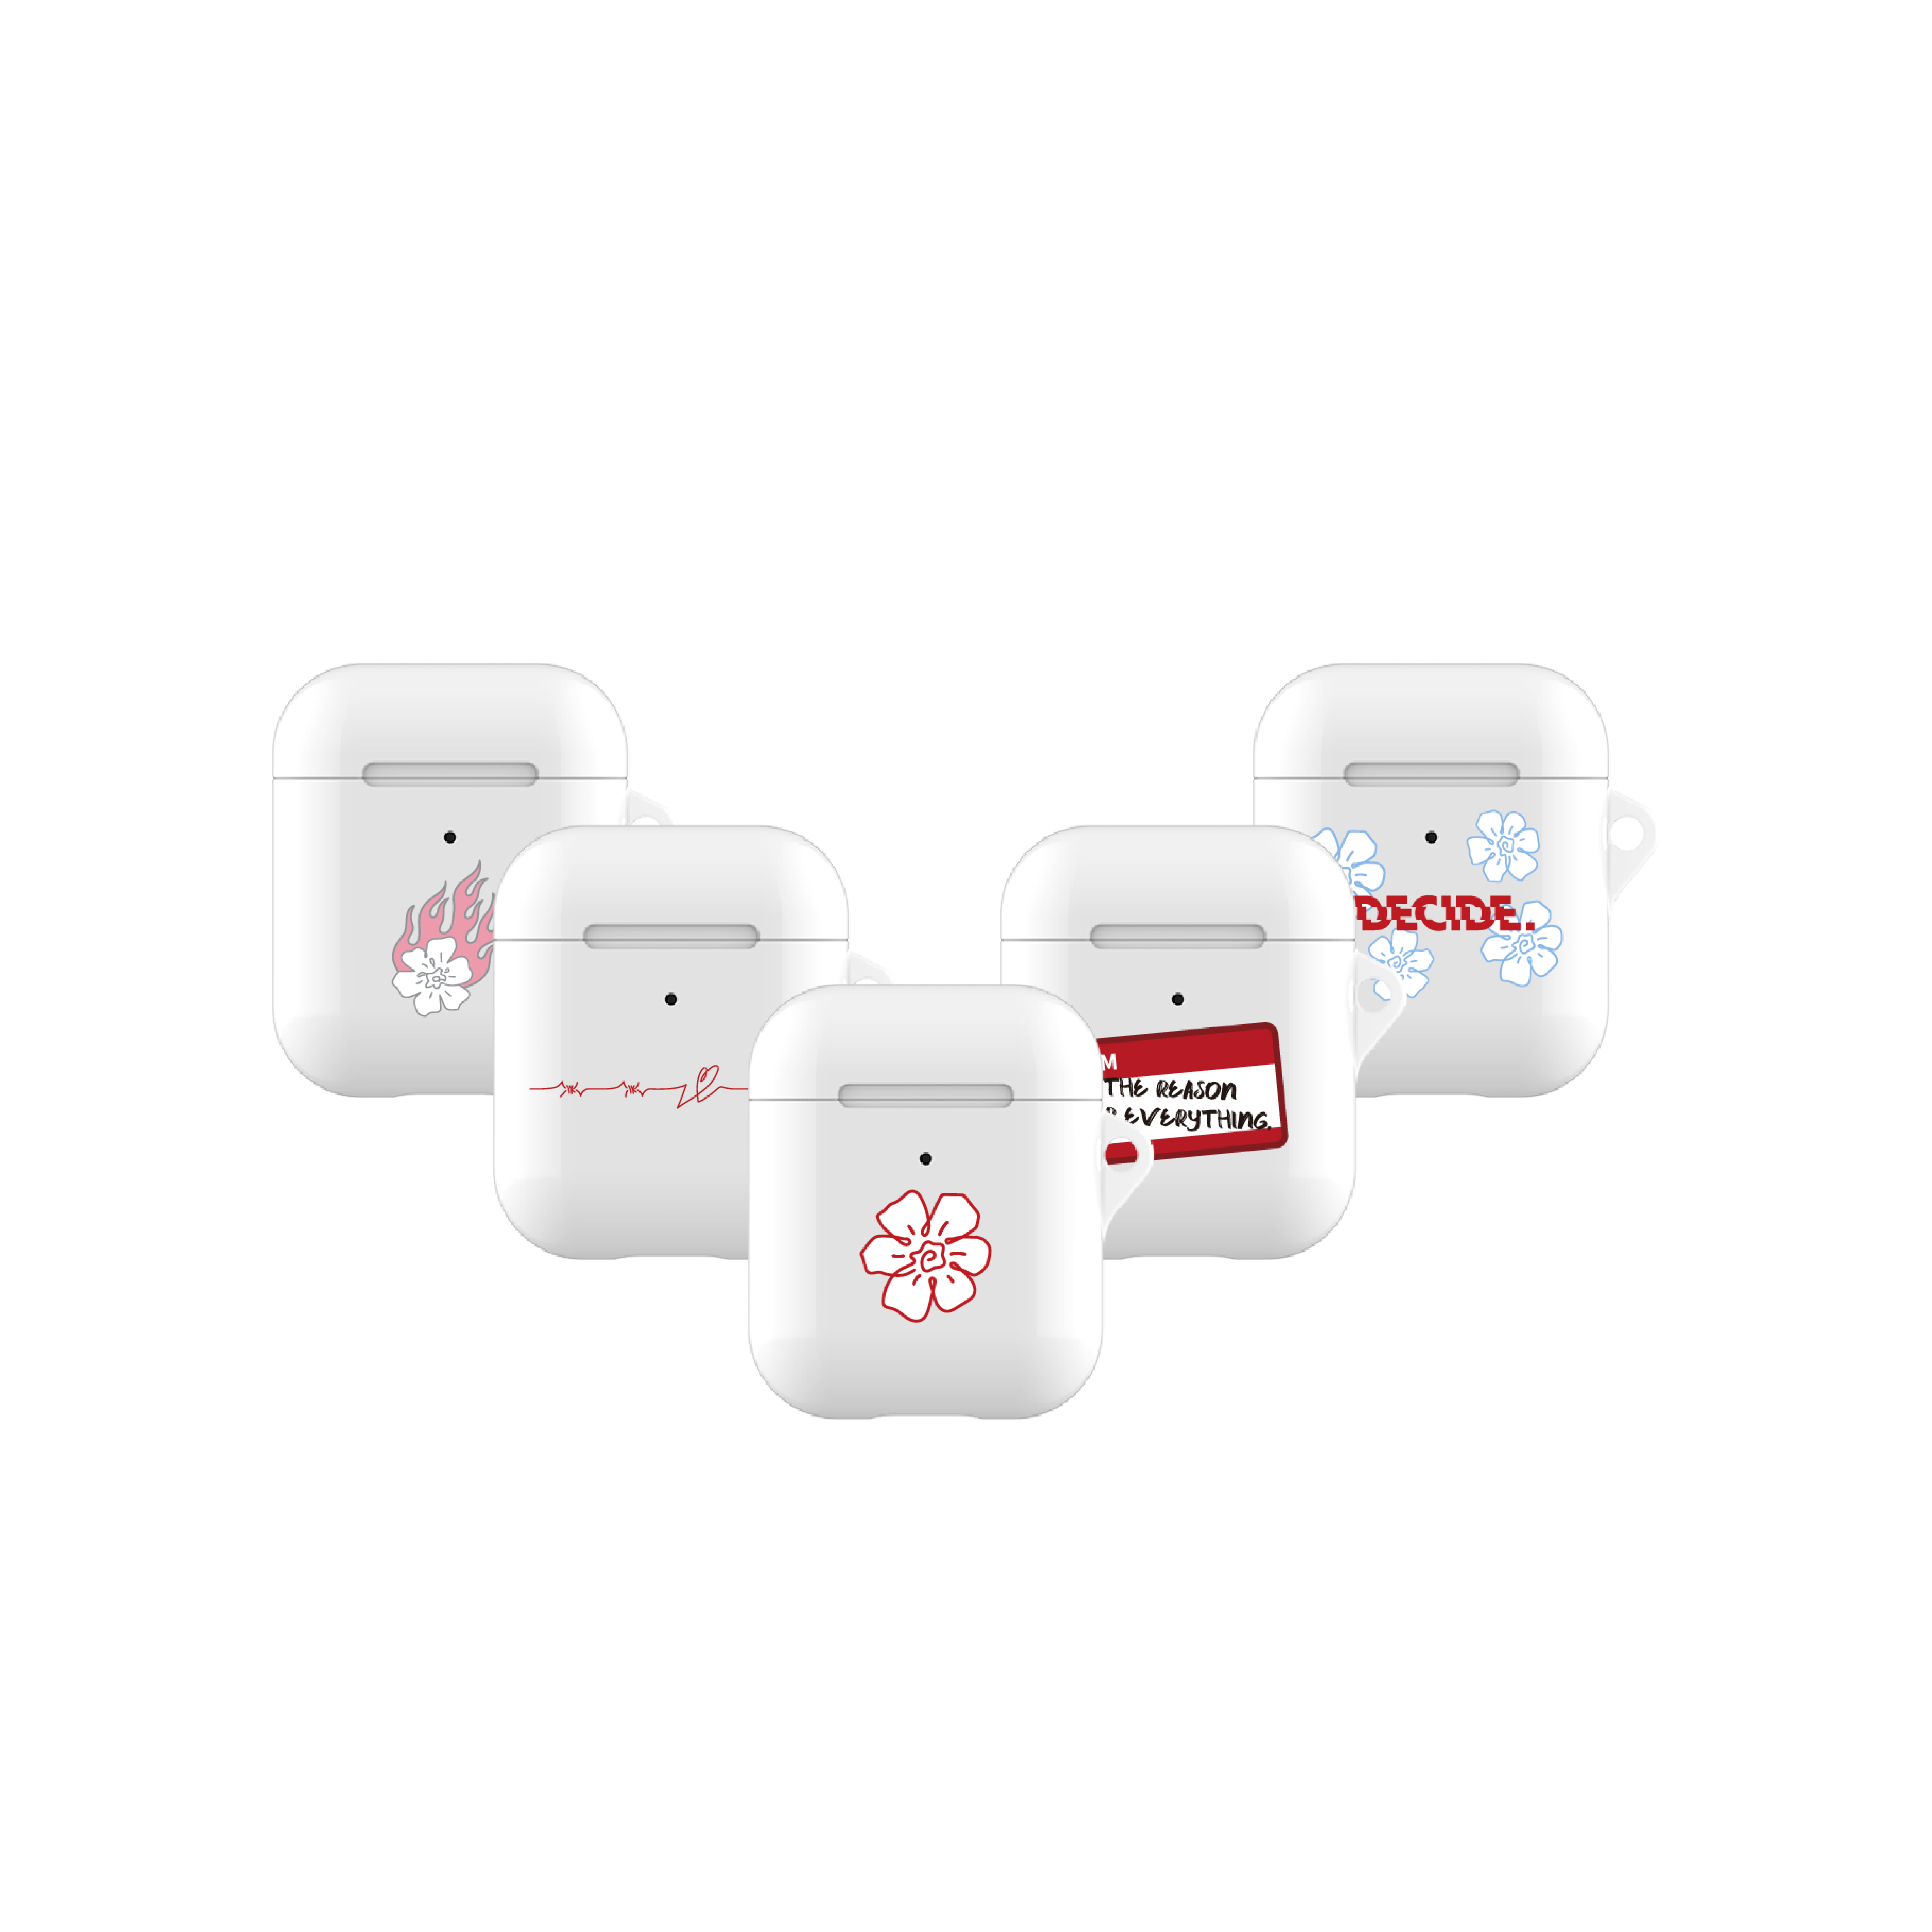 [TRADIT] iKON iDECIDE AIRPODS CASE